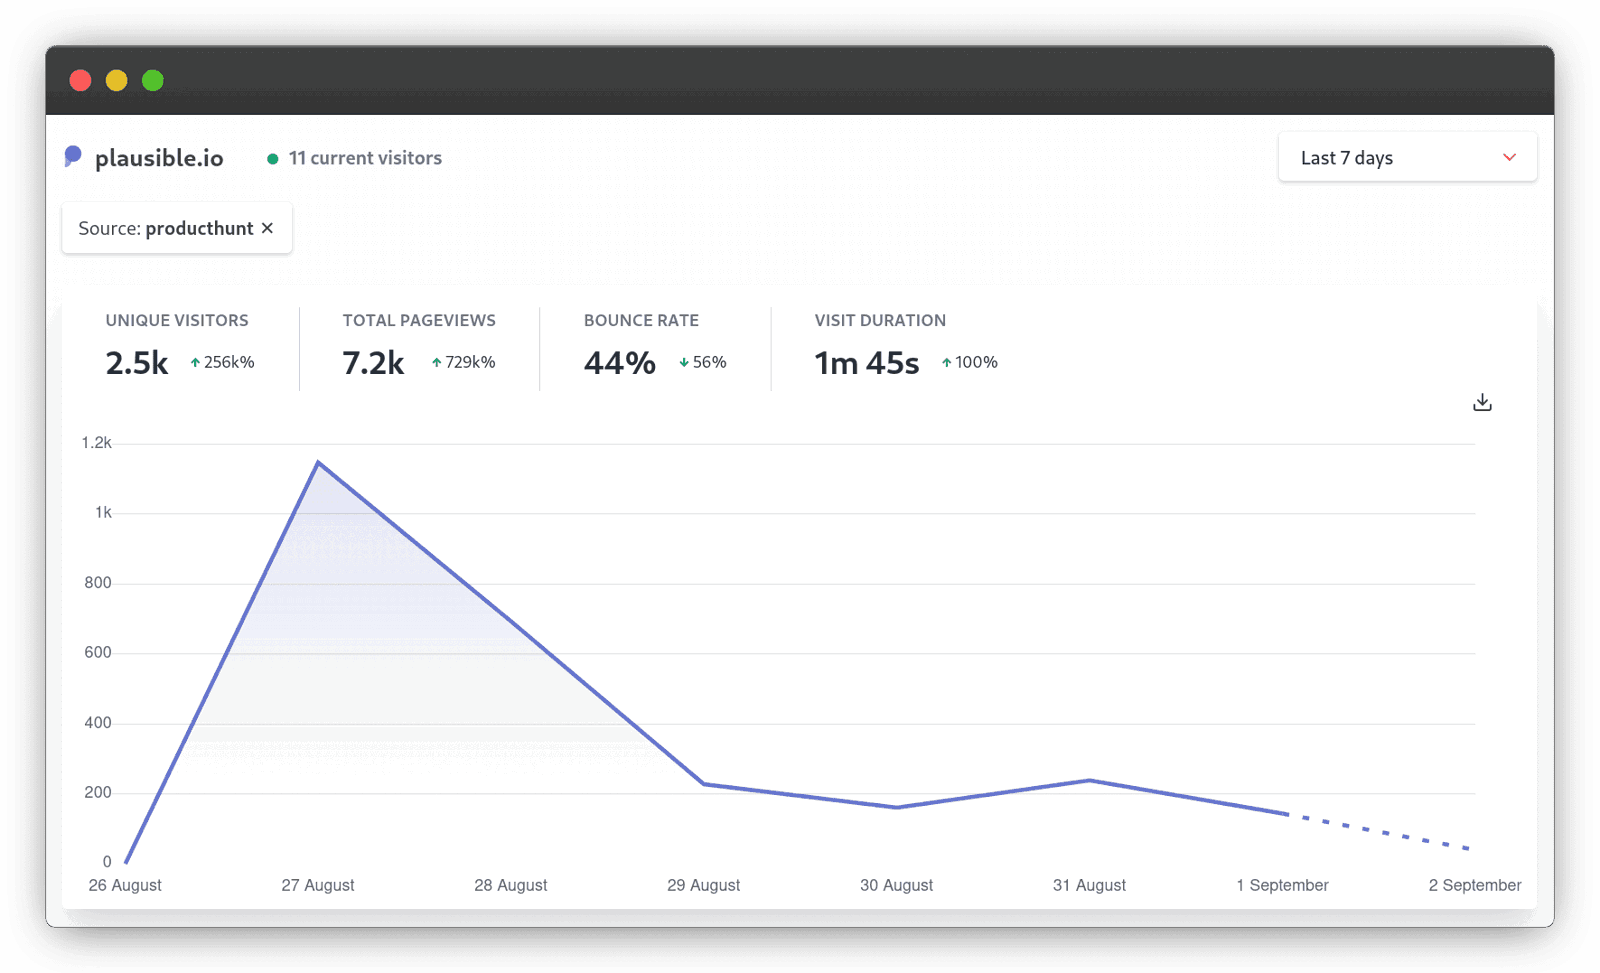 Our Product Hunt launch website traffic